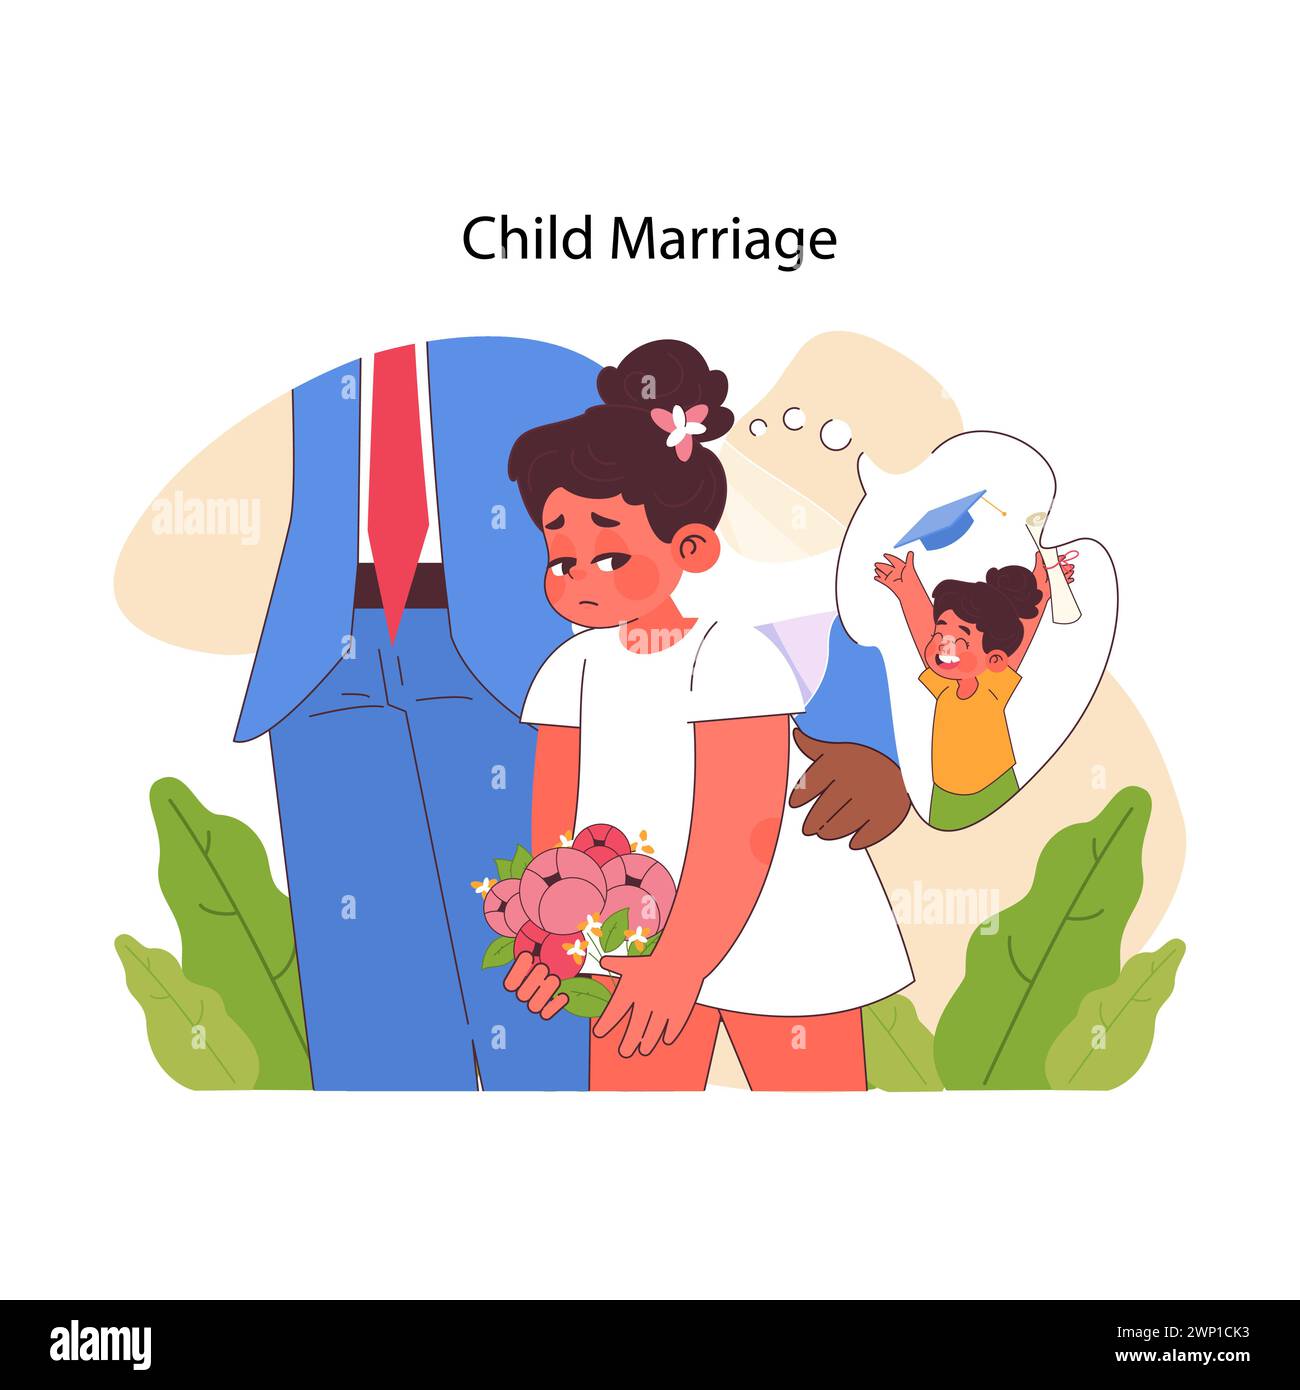 Child marriage concept. Young girl reluctantly holds flowers, her dreams of education fading, placed with looming adult male figure. Women rights violation, oppression. Flat vector illustration Stock Vector